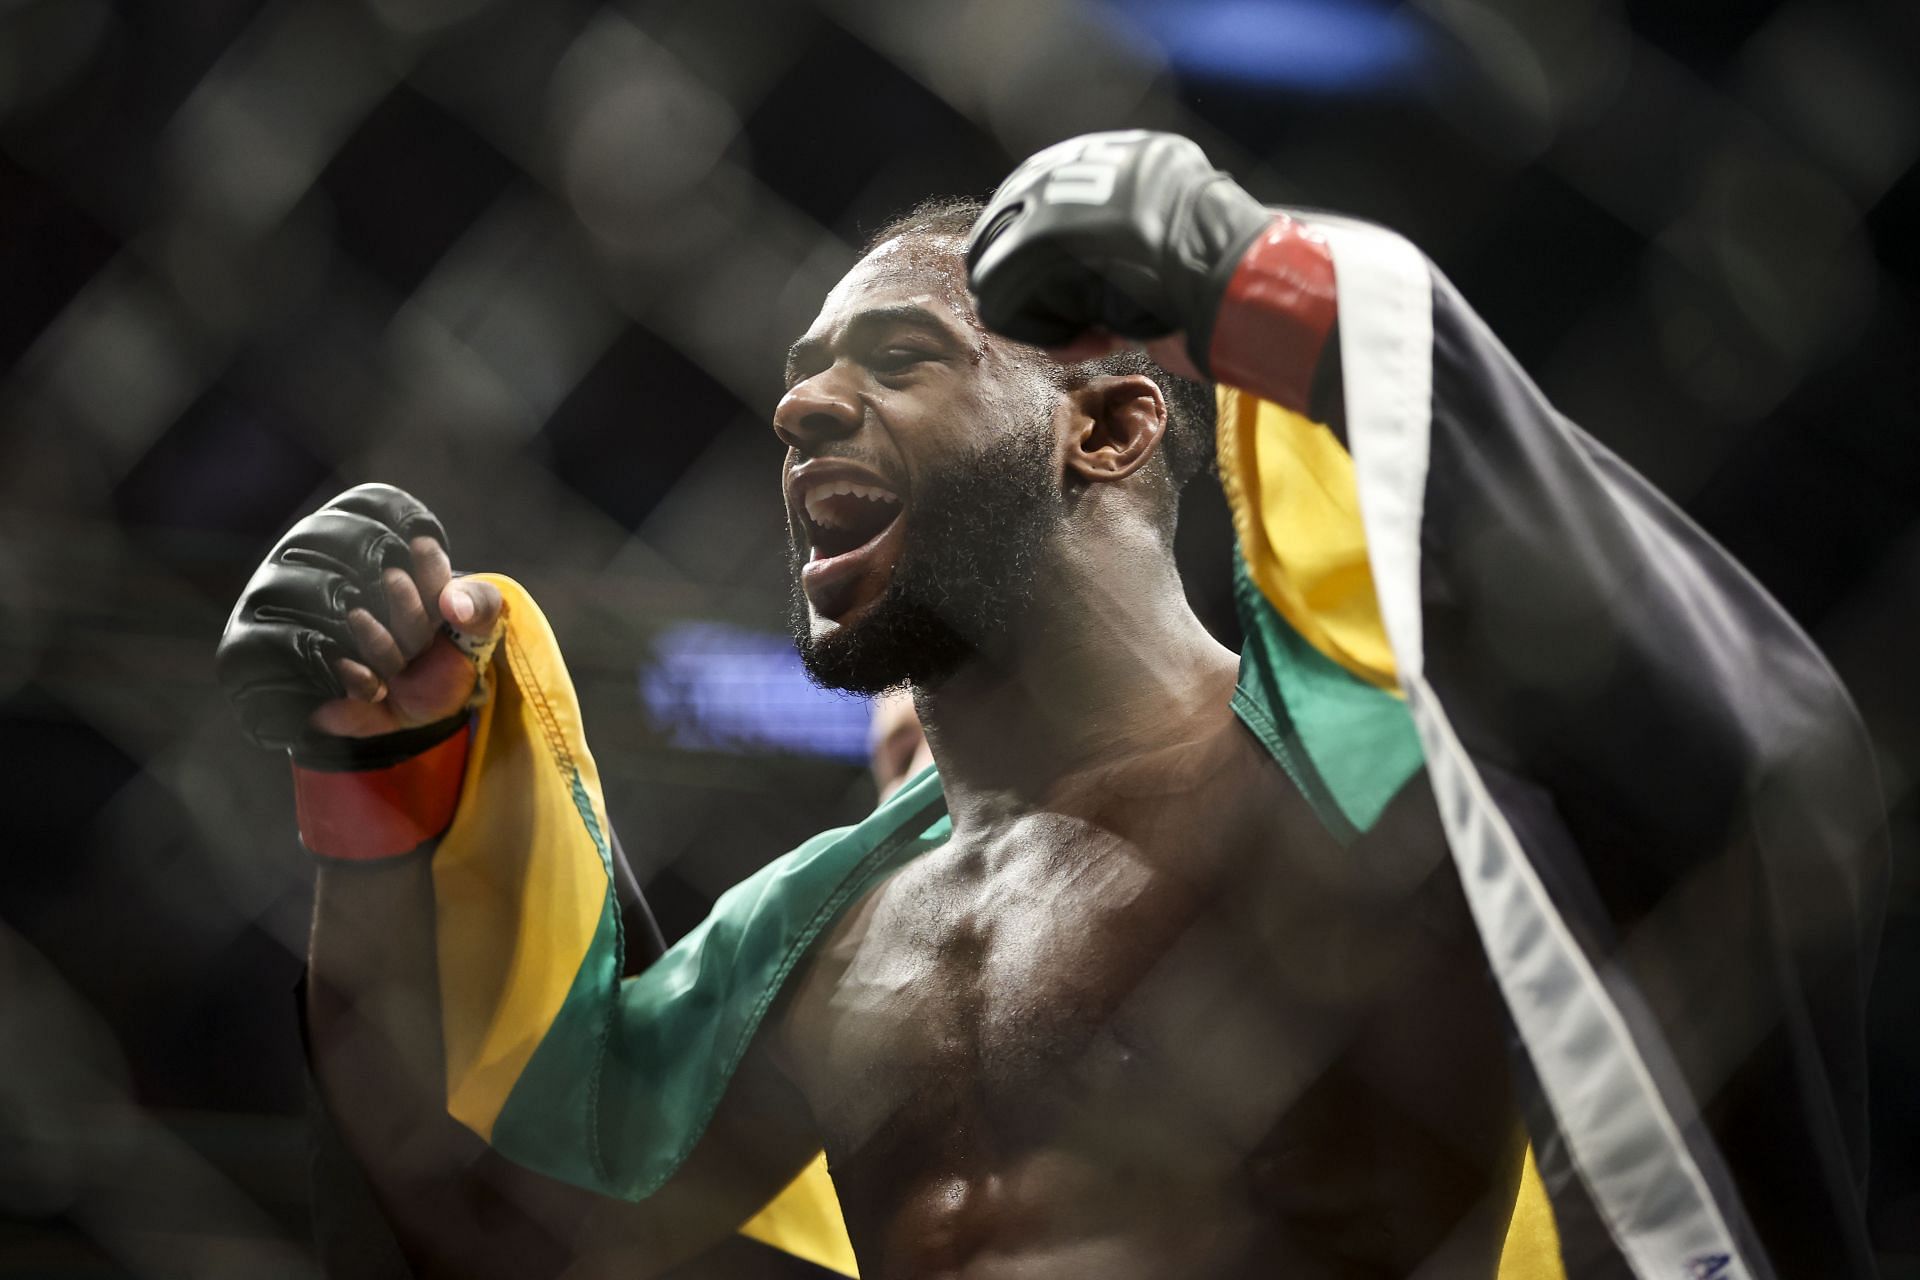 Aljamain Sterling could pick up a third win over a former bantamweight champion if he faces Henry Cejudo in 2023